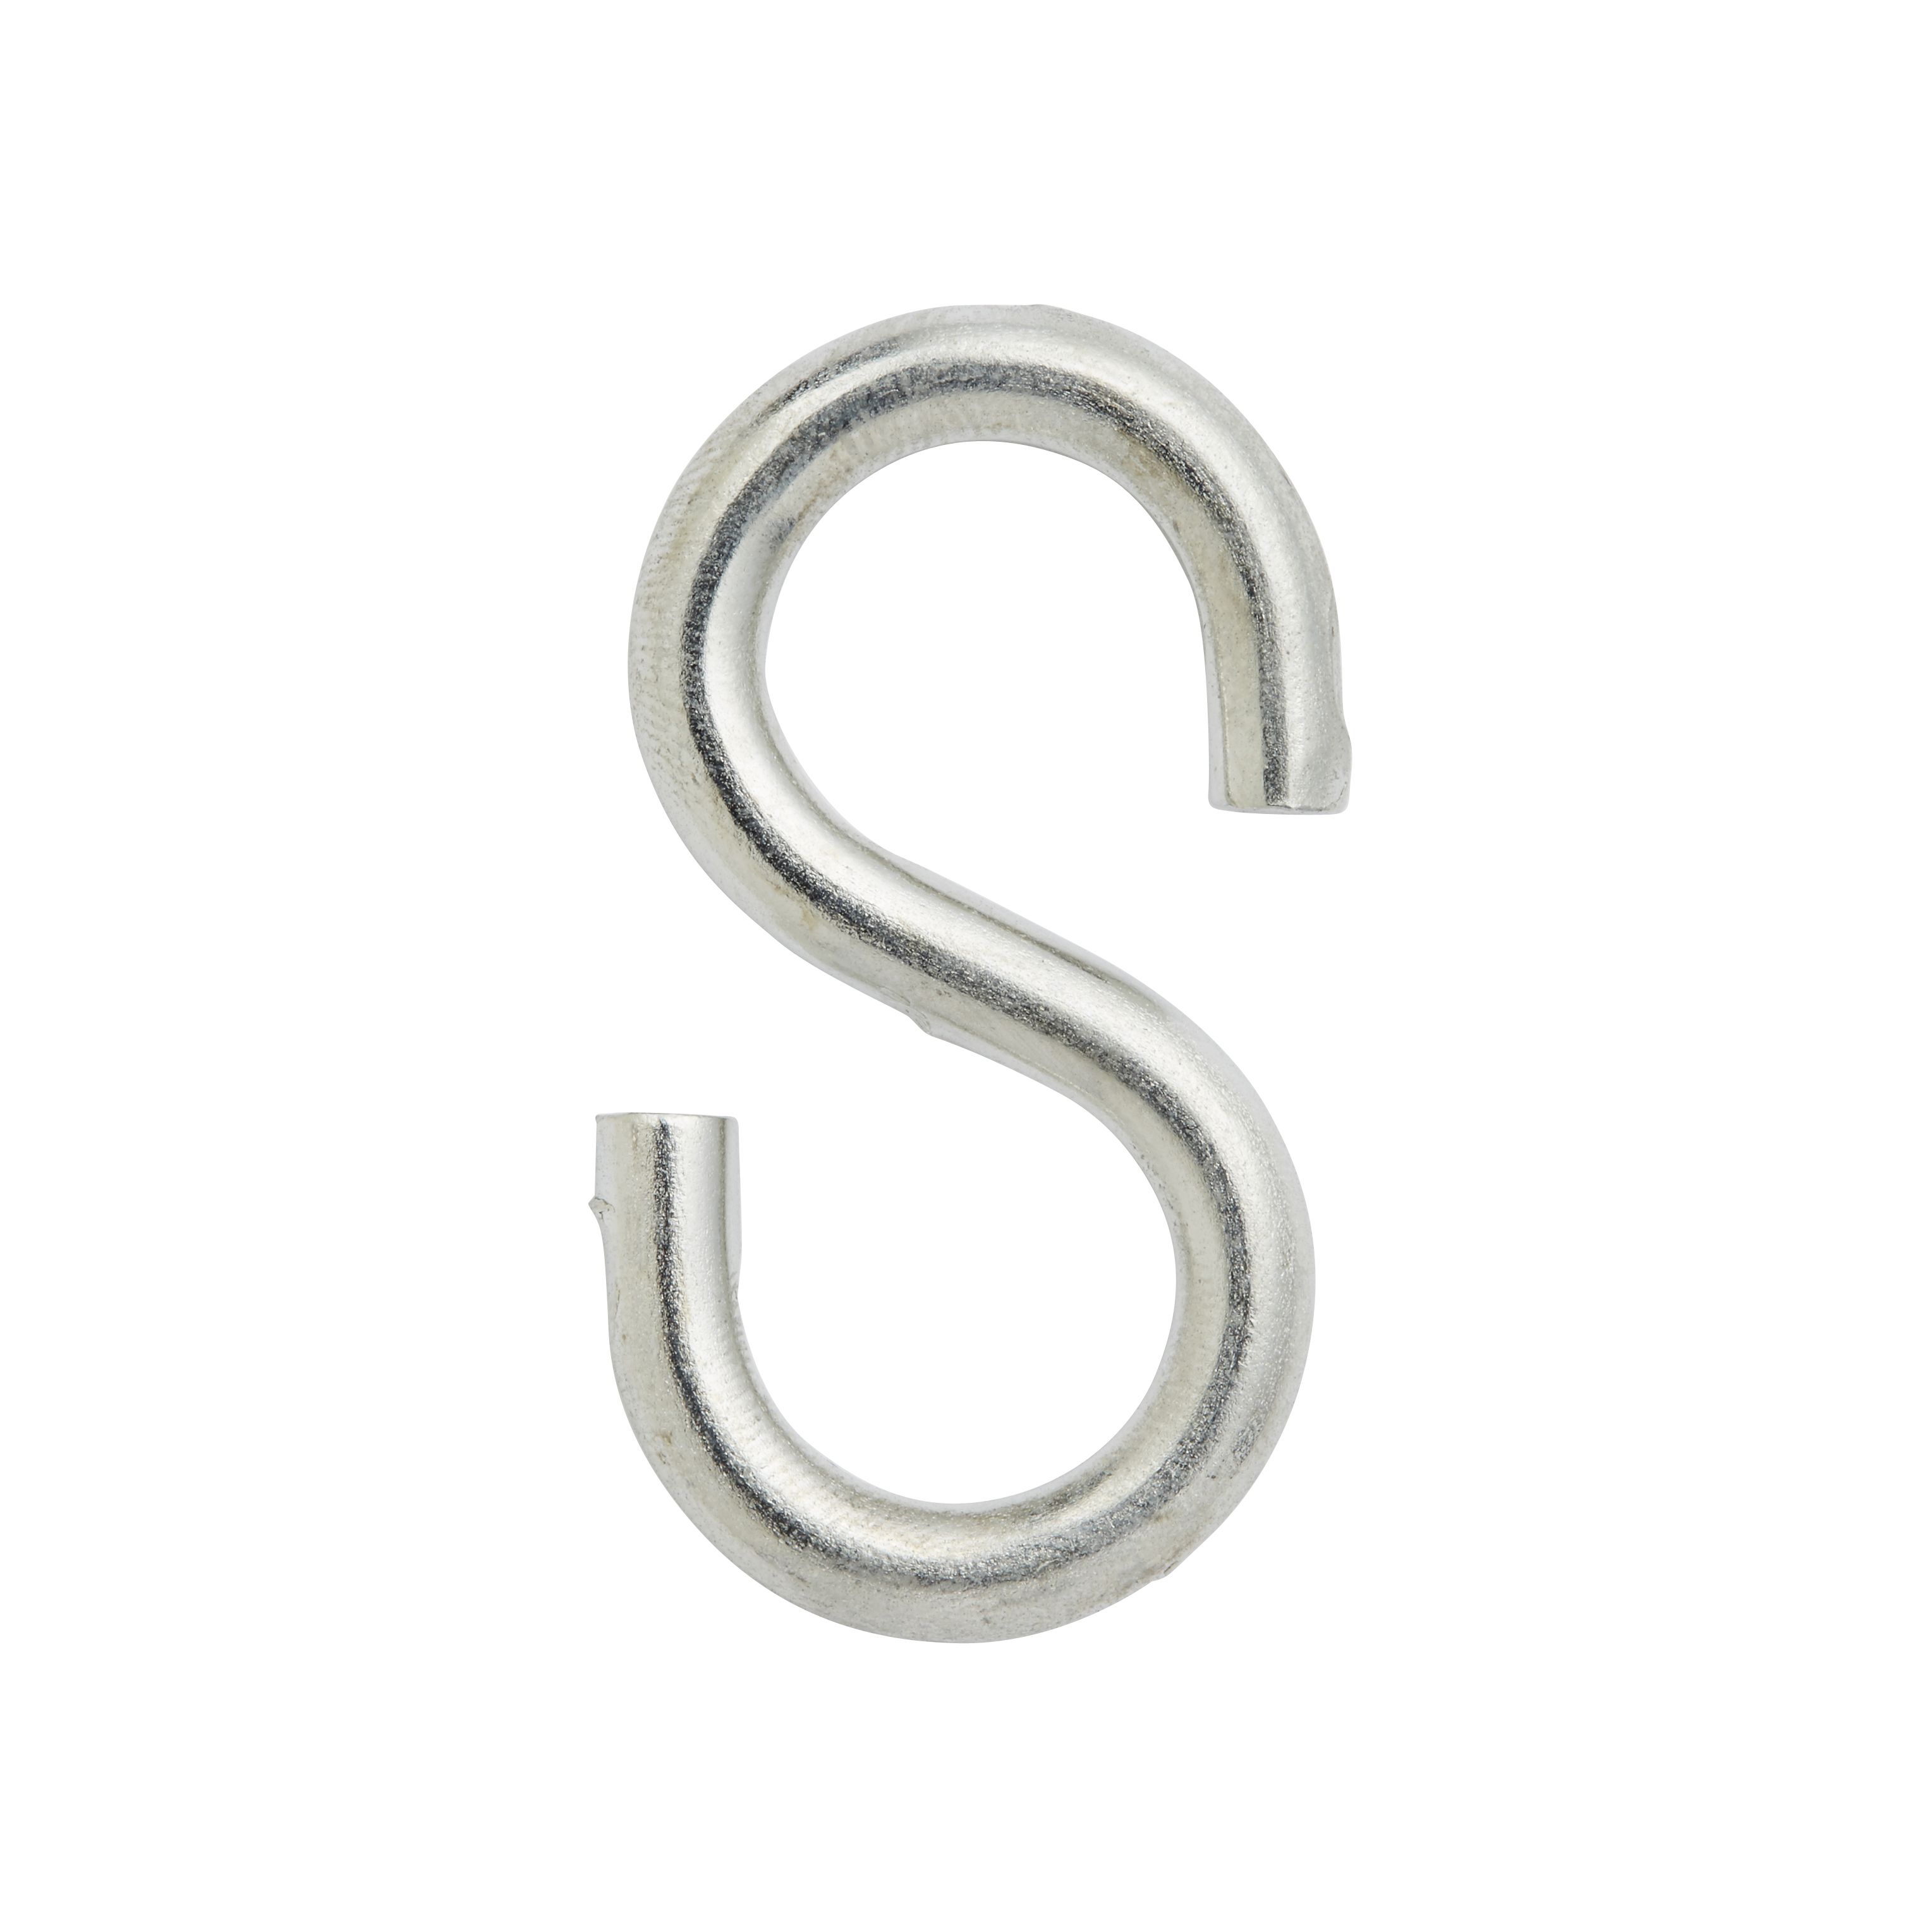 Diall Zinc-plated Steel S-hook (L)25mm, Pack of 6